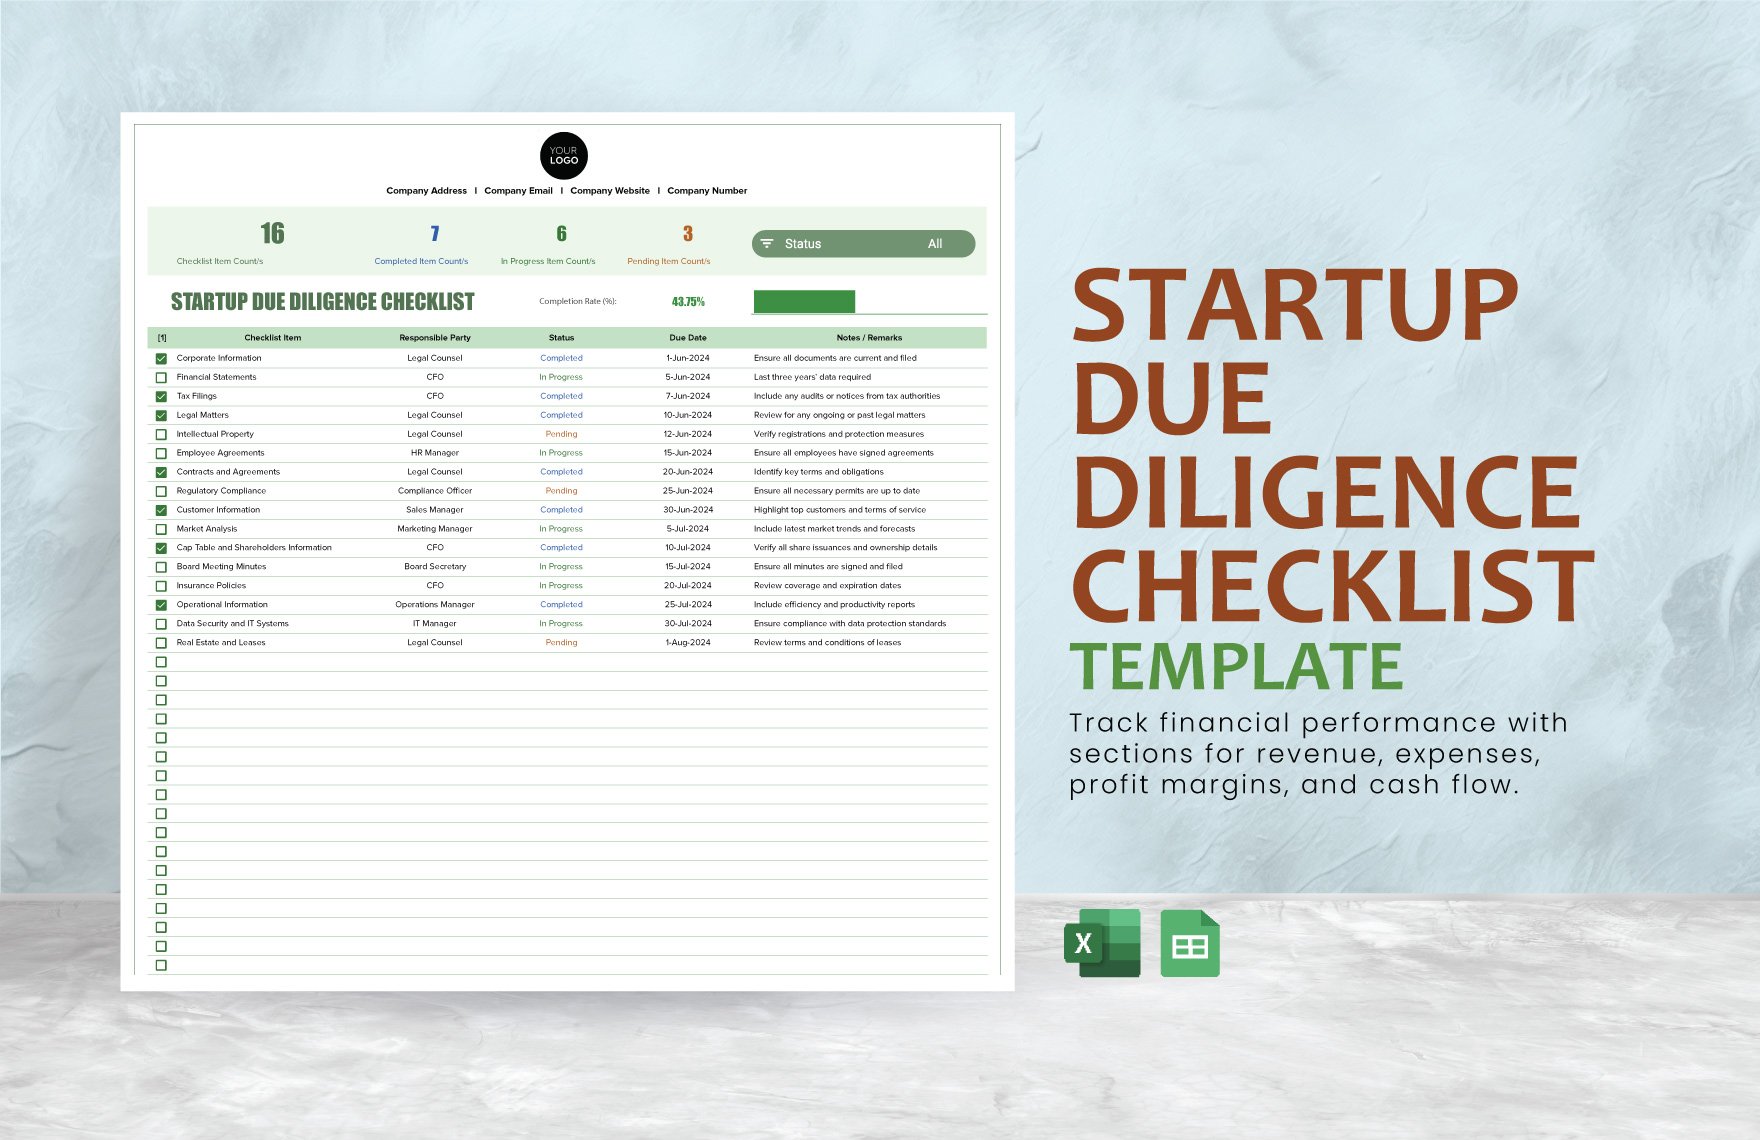 Startup Due Diligence Checklist Template in Excel, Google Sheets